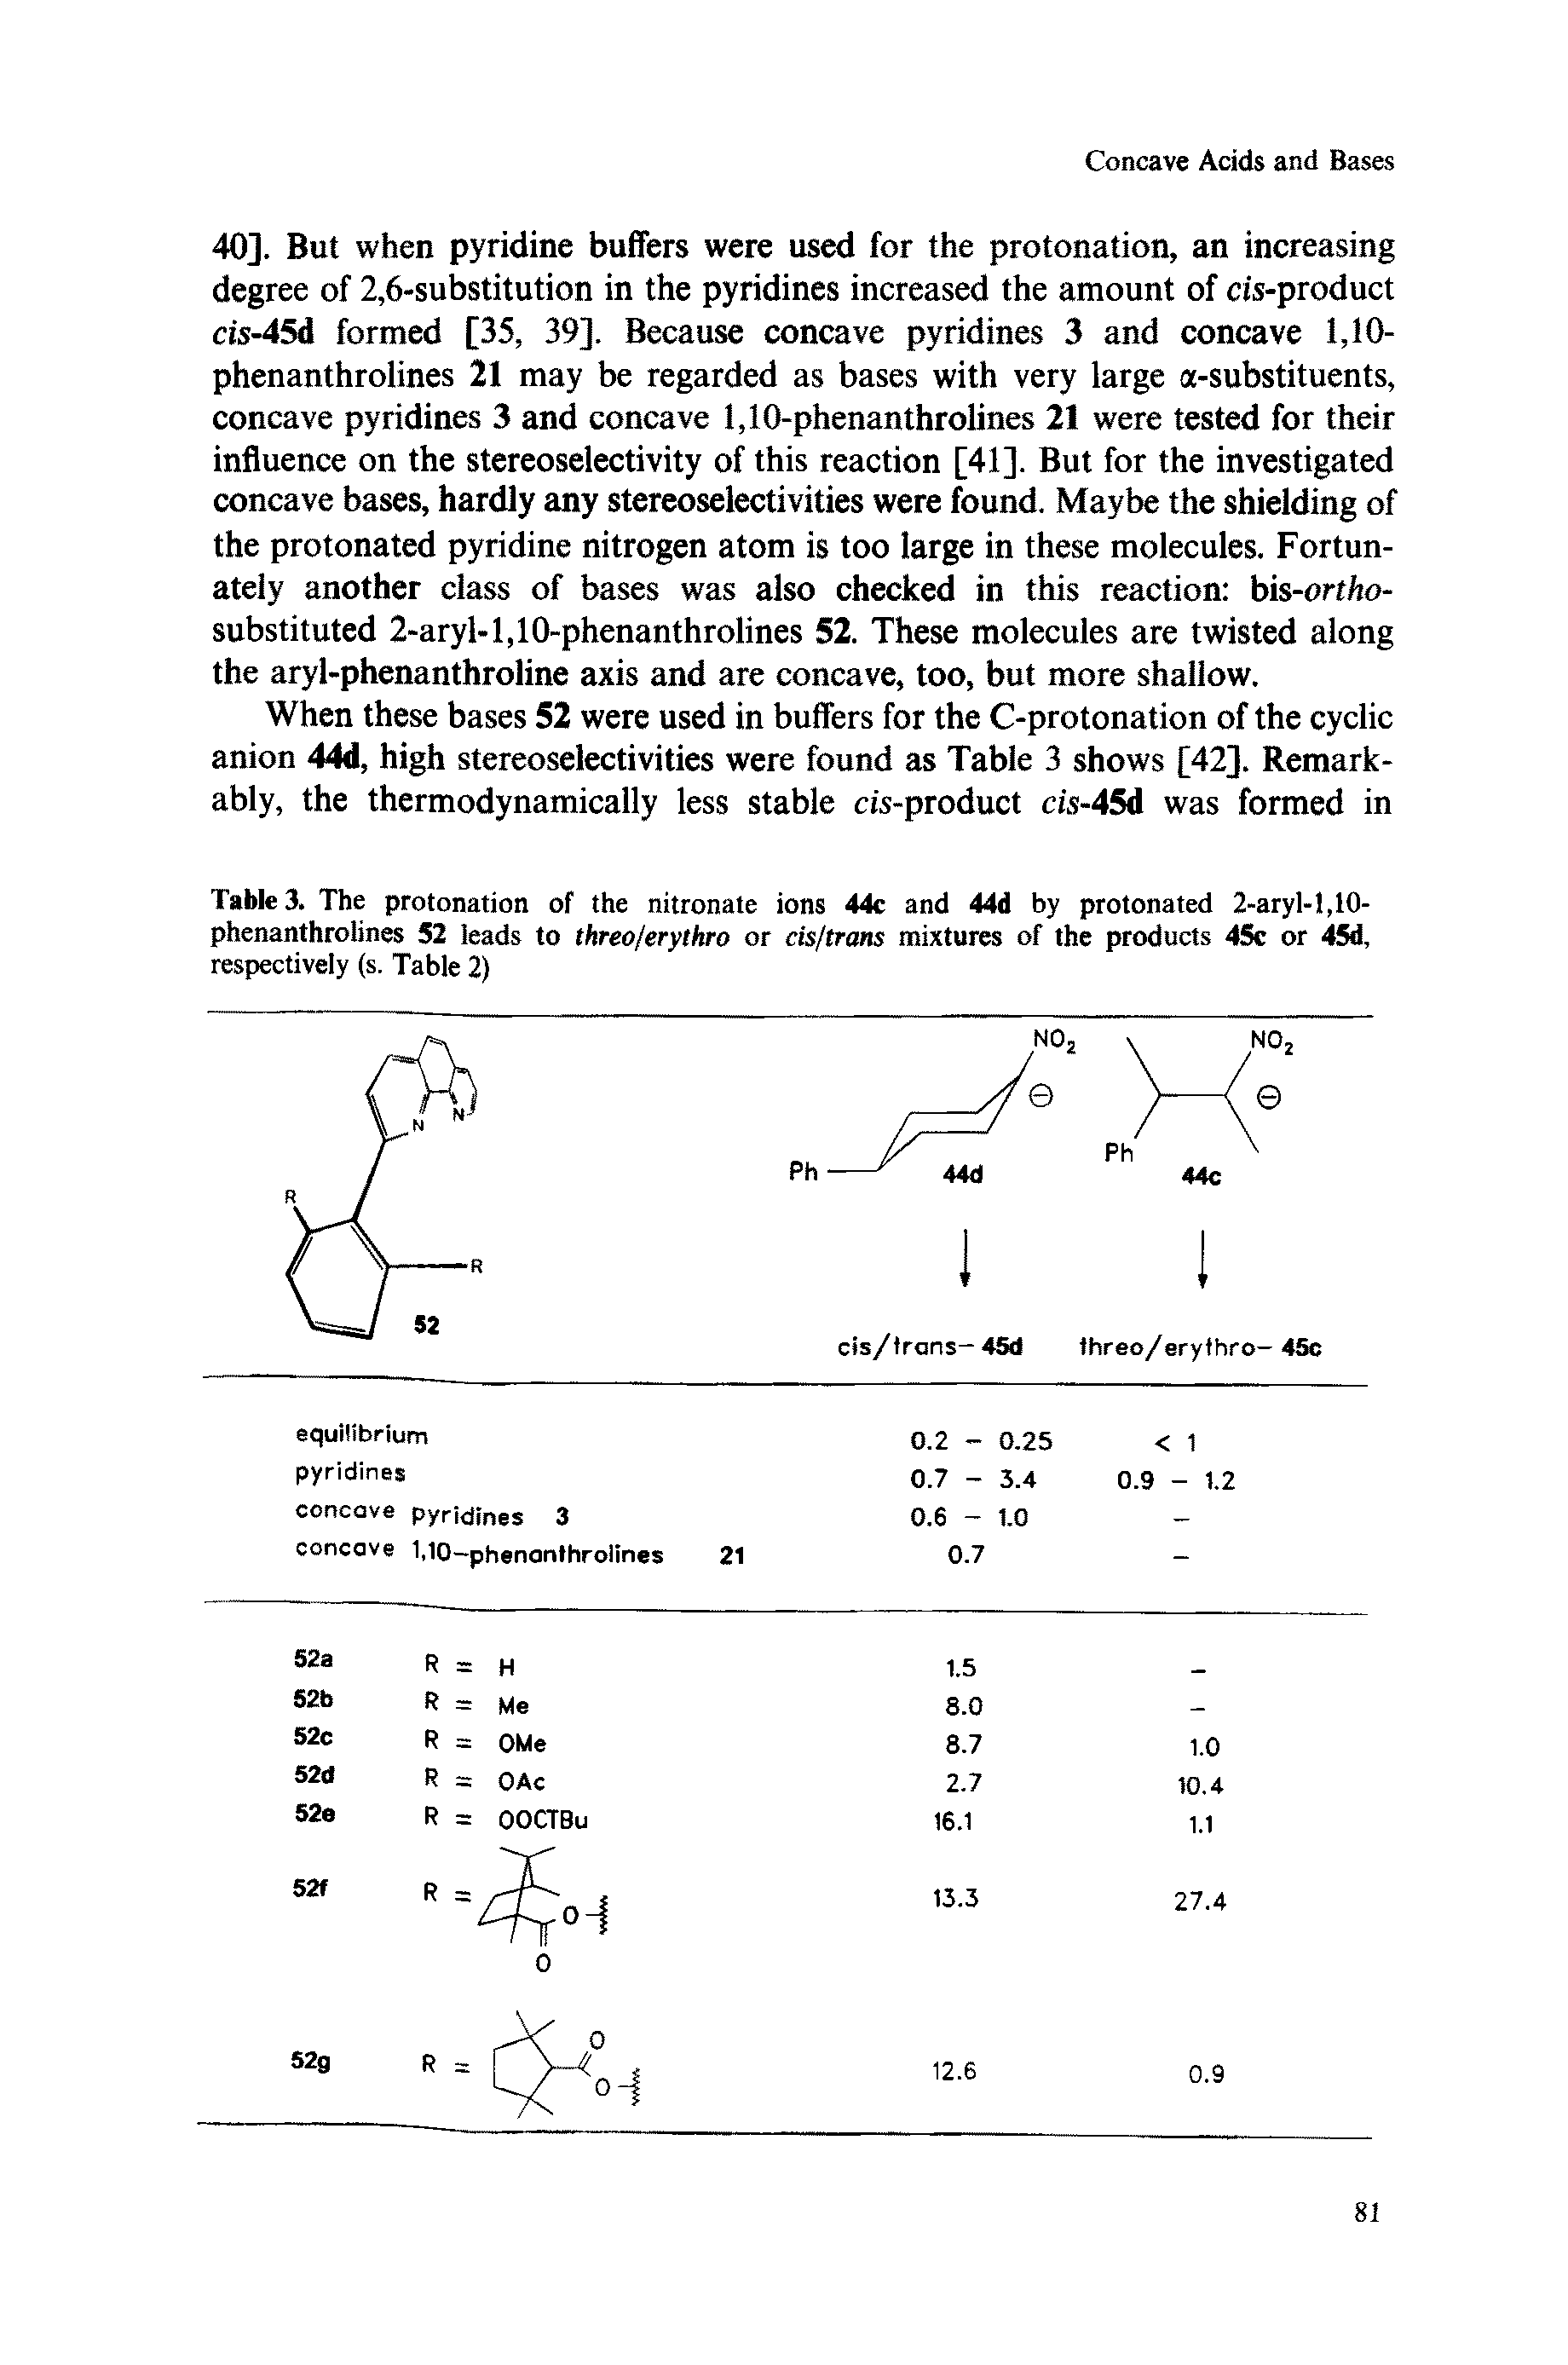 Tables. The protonation of the nitronate ions 44c and 44d by protonated 2-aryl-l,10-phenanthrolines 52 leads to threojerythro or cis/trans mixtures of the products 45c or 4M, respectively (s. Table 2)...